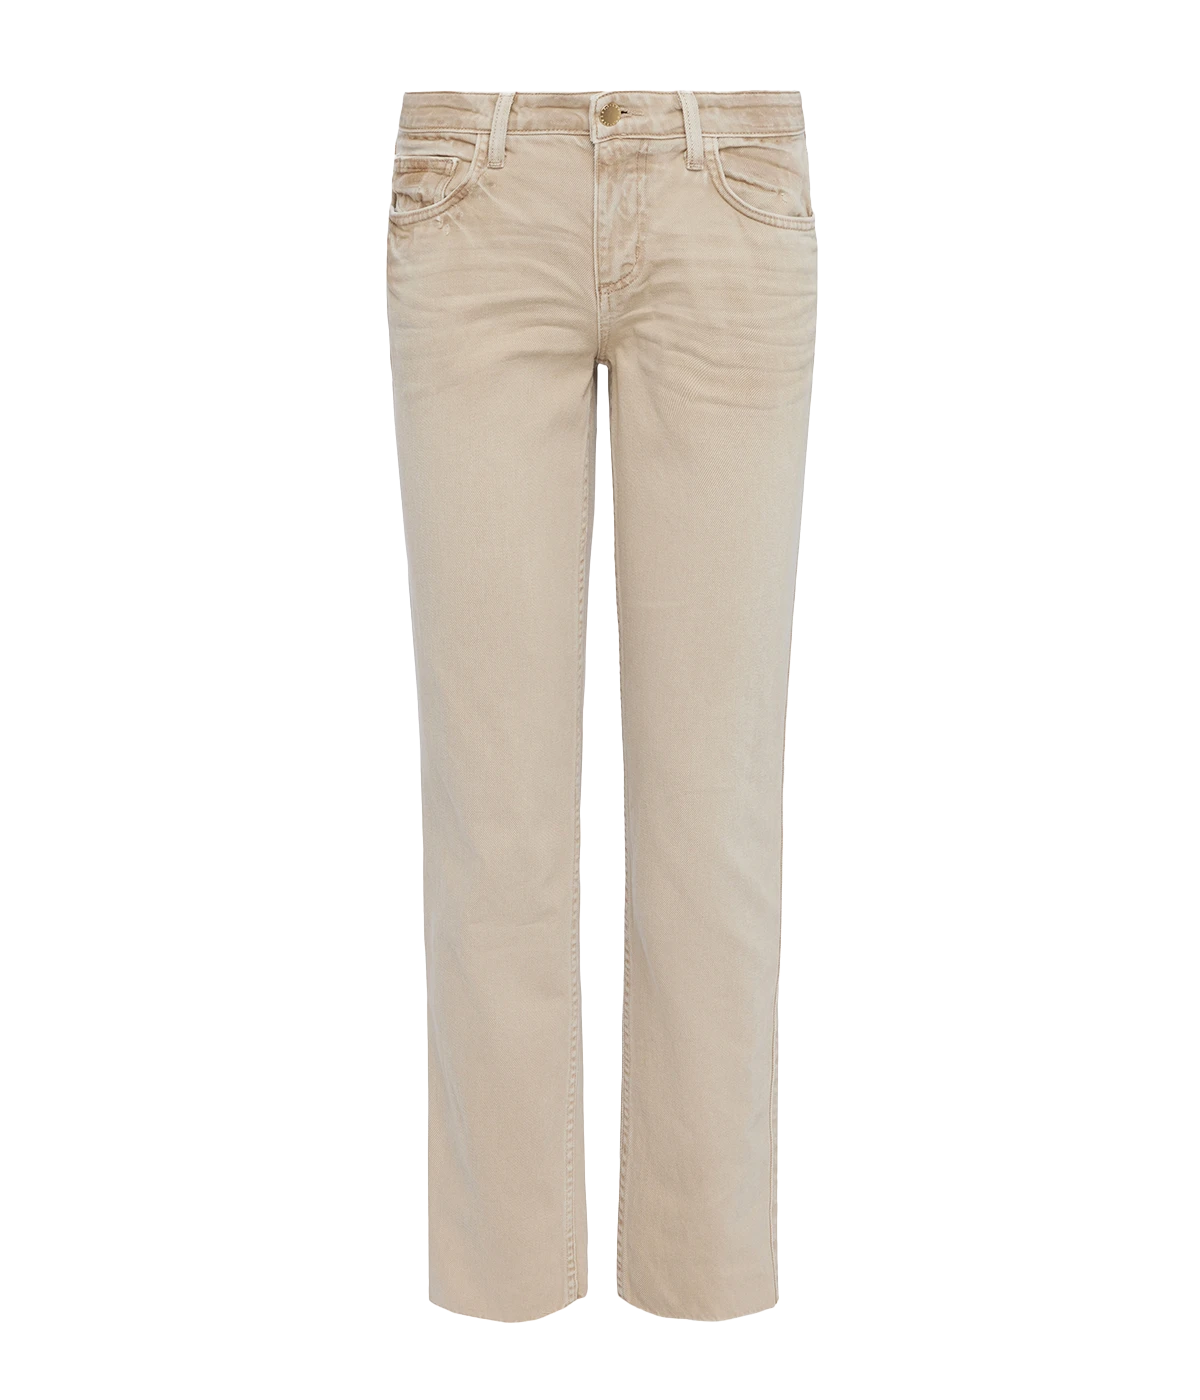 Sand coloured straight jean by l'agence with a mid-rise and cropped length.